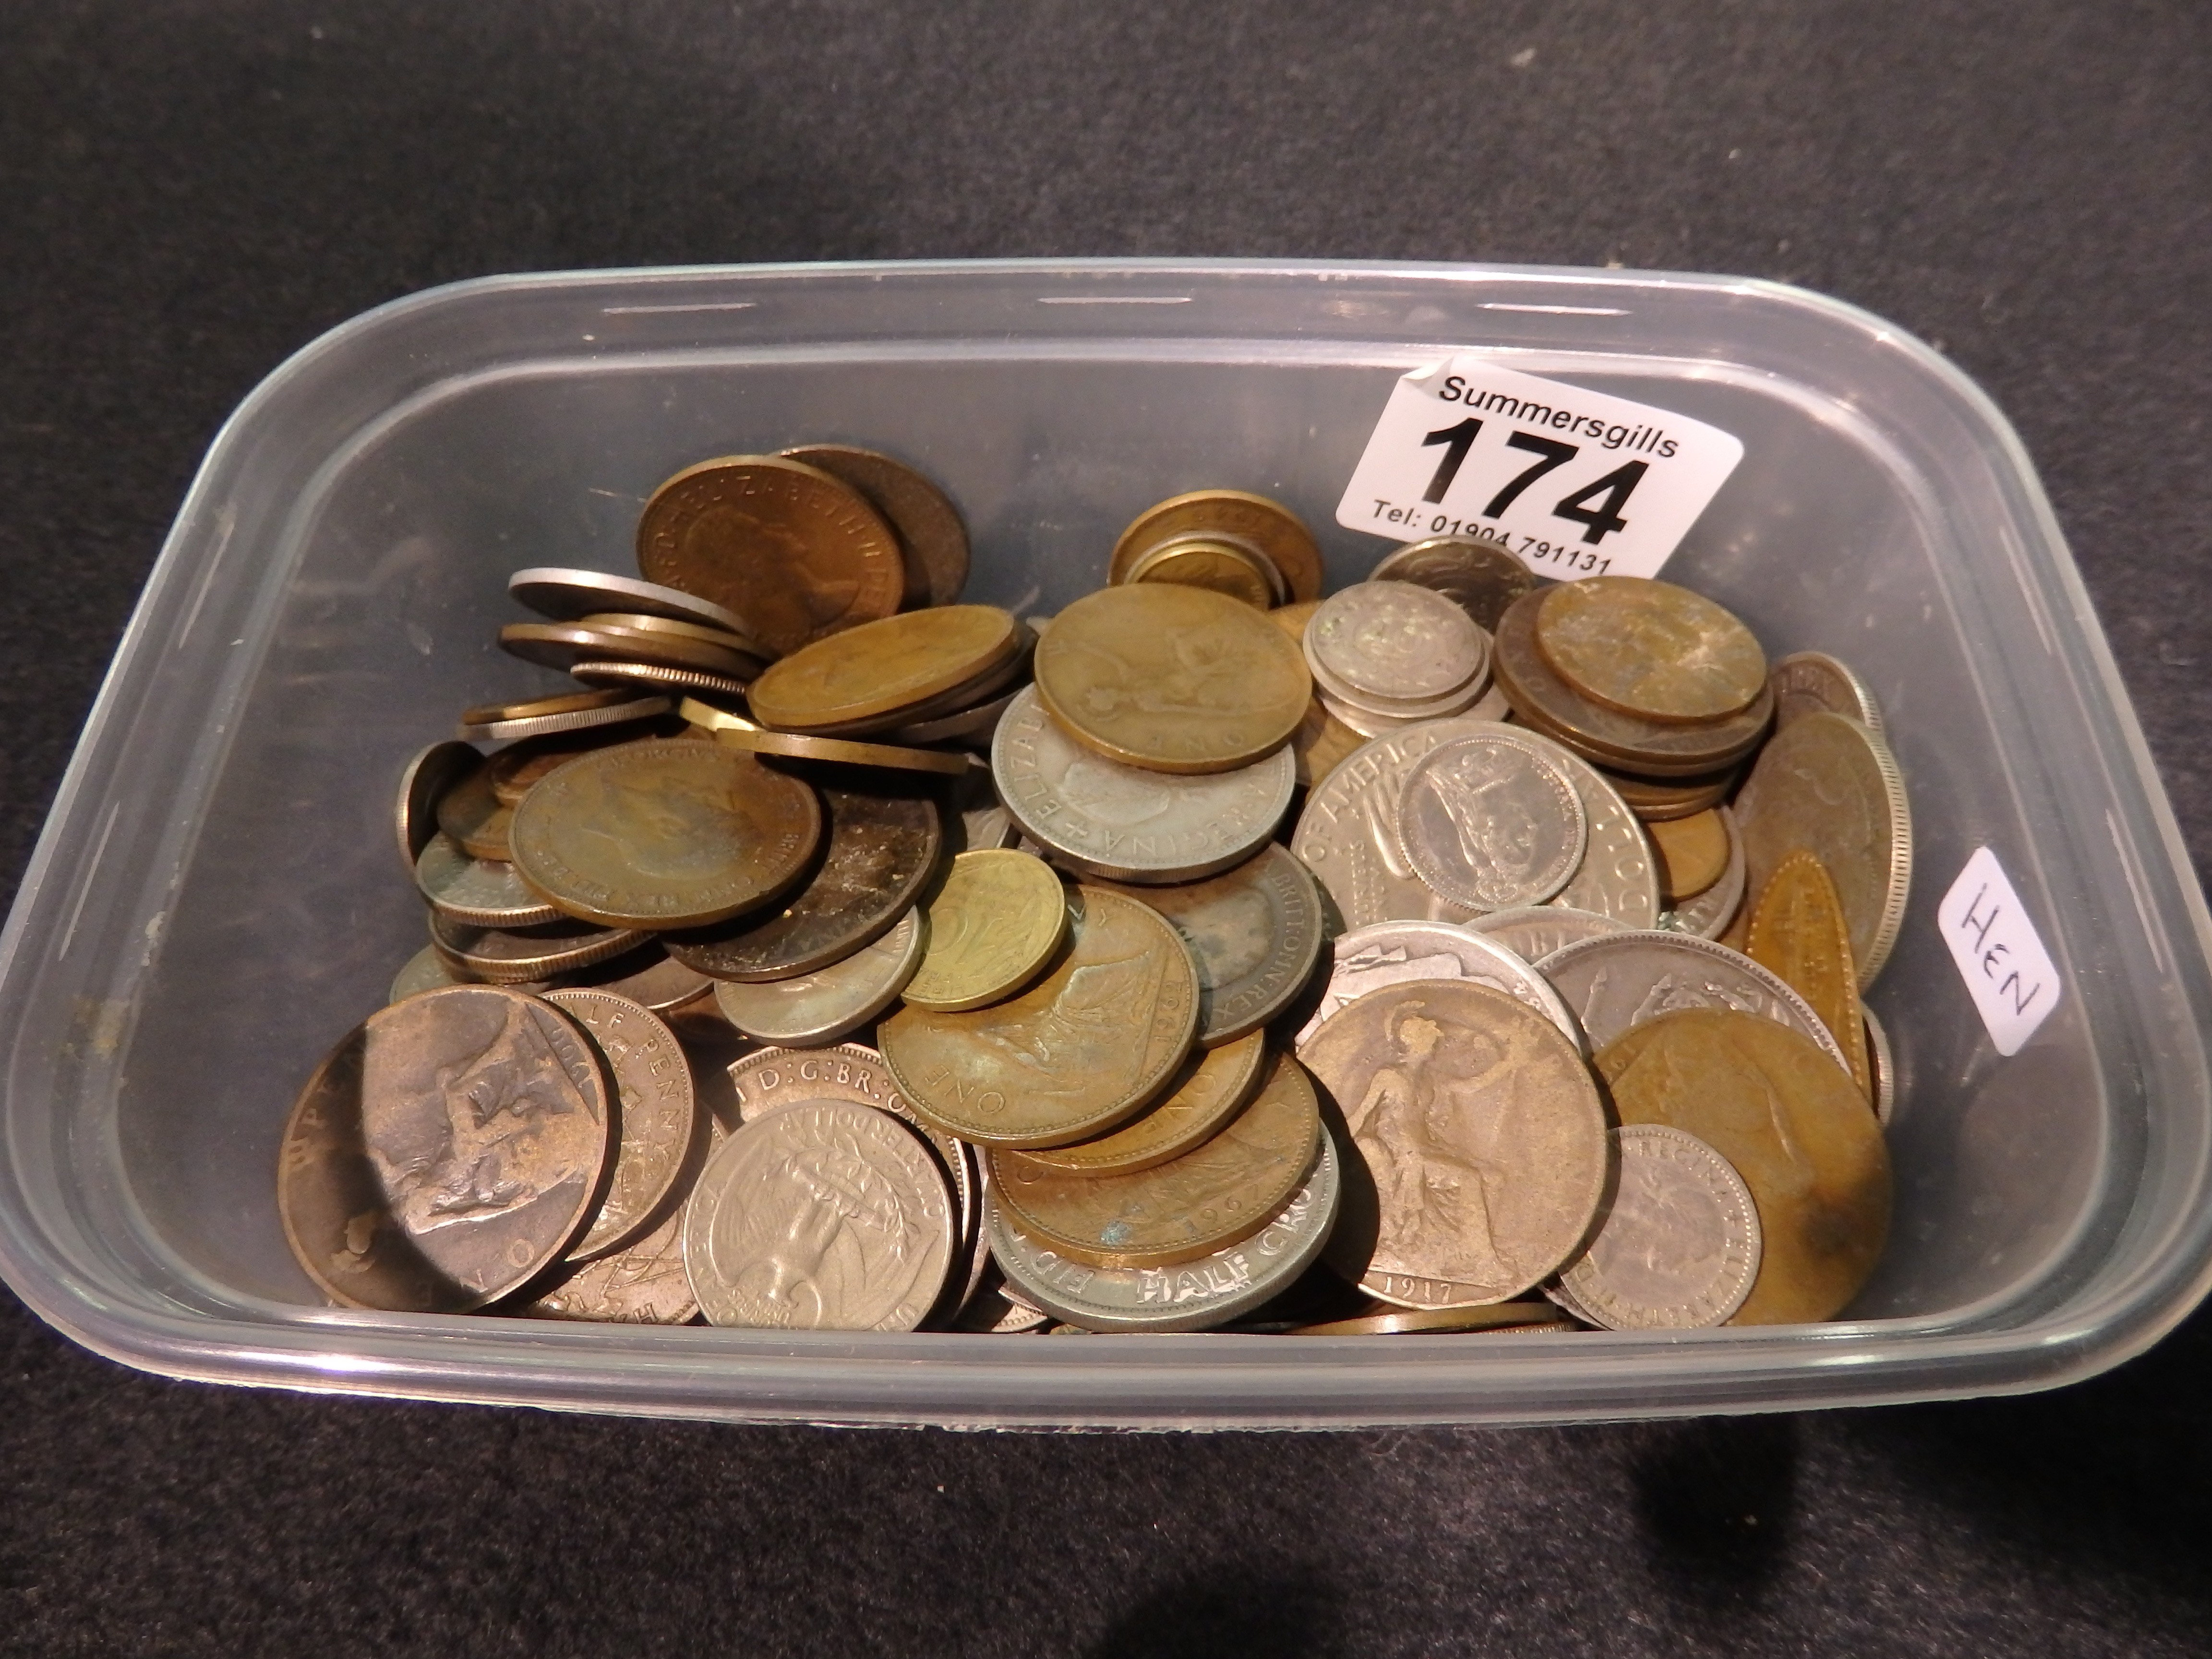 19th and 20th Century British and Foreign coins